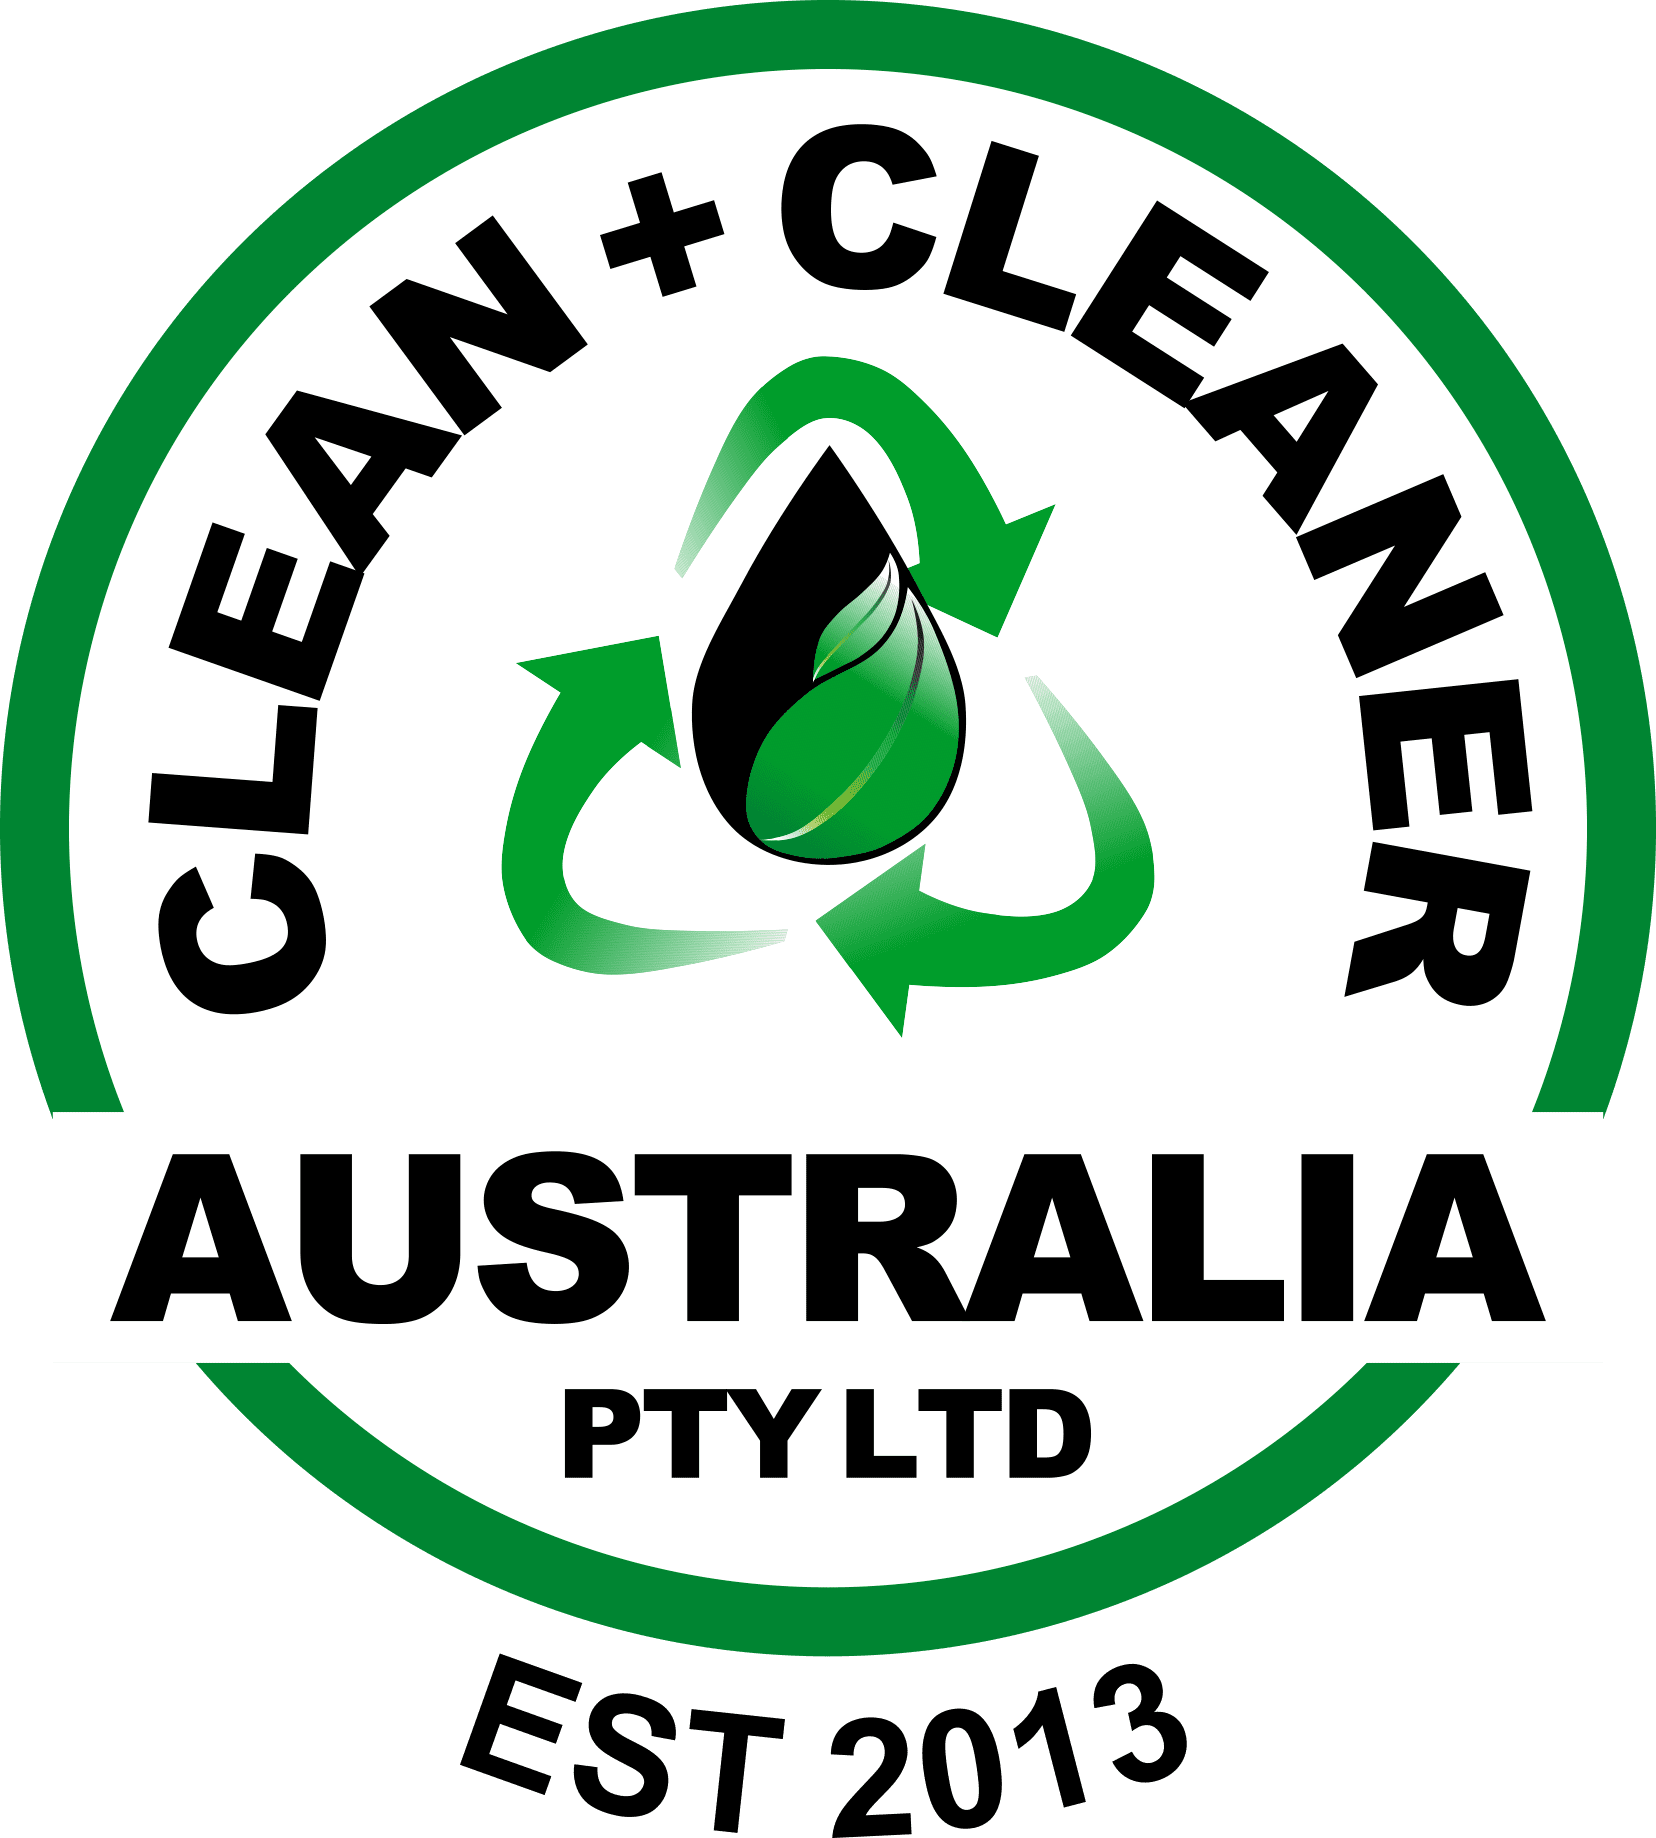 Cleaning Services In Rockhampton